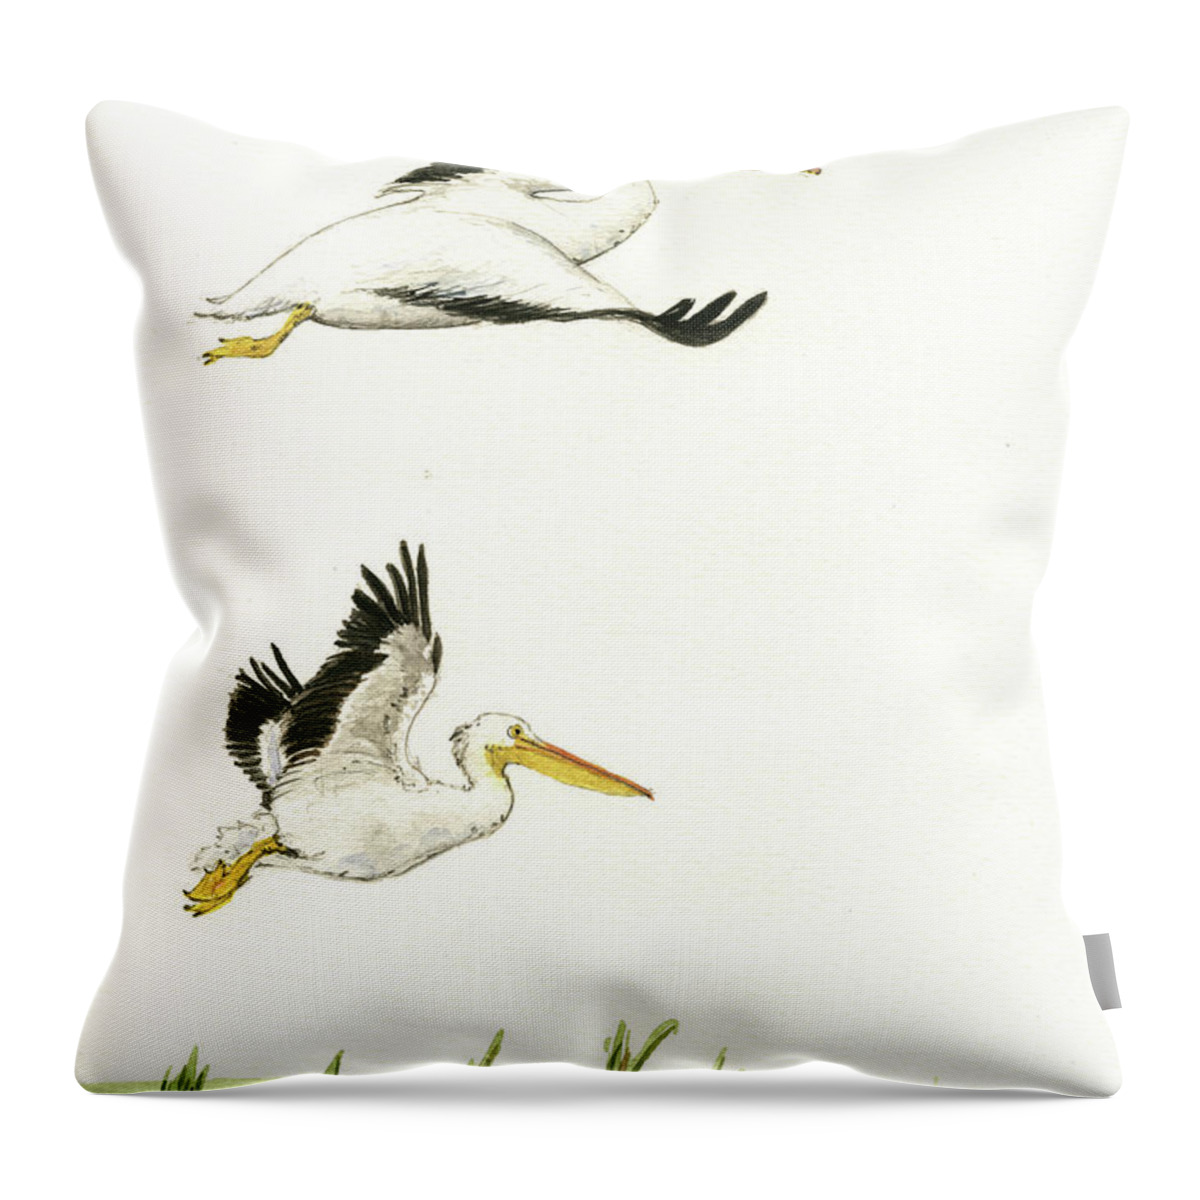 Pelican Art Throw Pillow featuring the painting The Fox And The Pelicans #2 by Juan Bosco